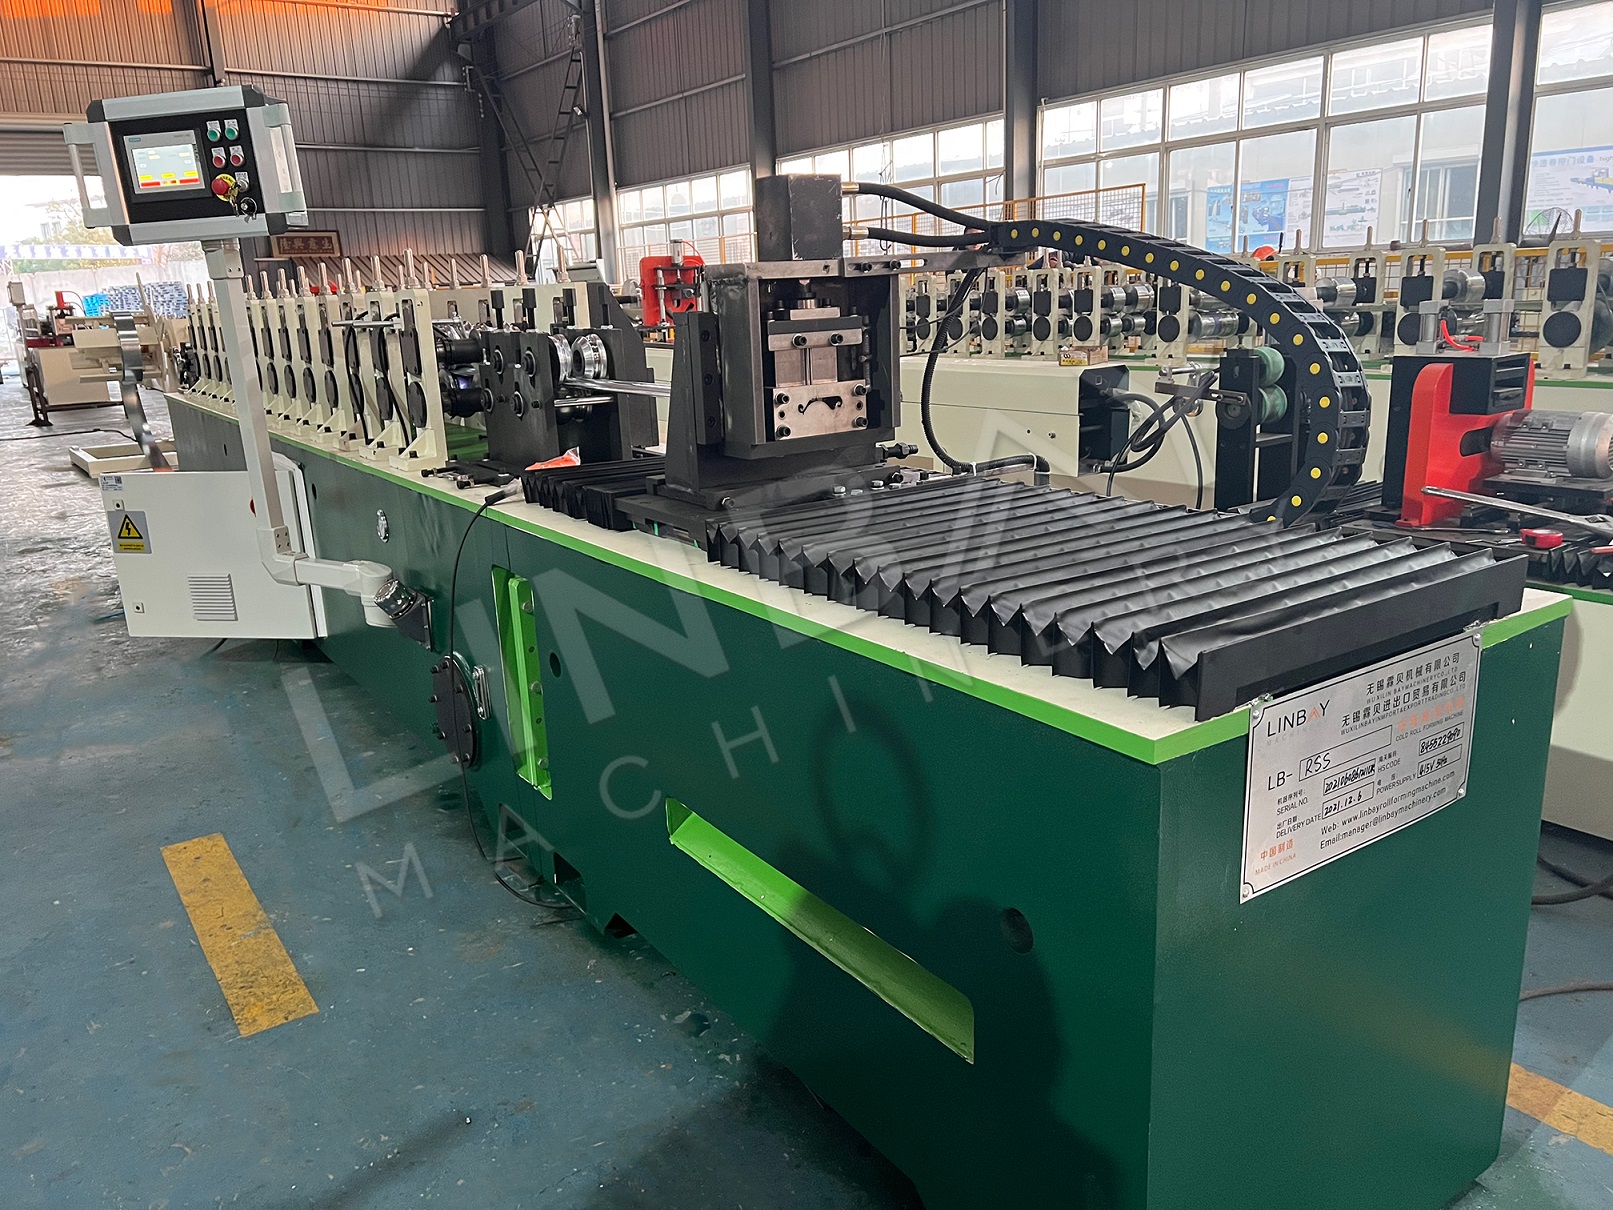 LINBAY-Export Rolling Shutter Slat Roll Forming Machine to UK